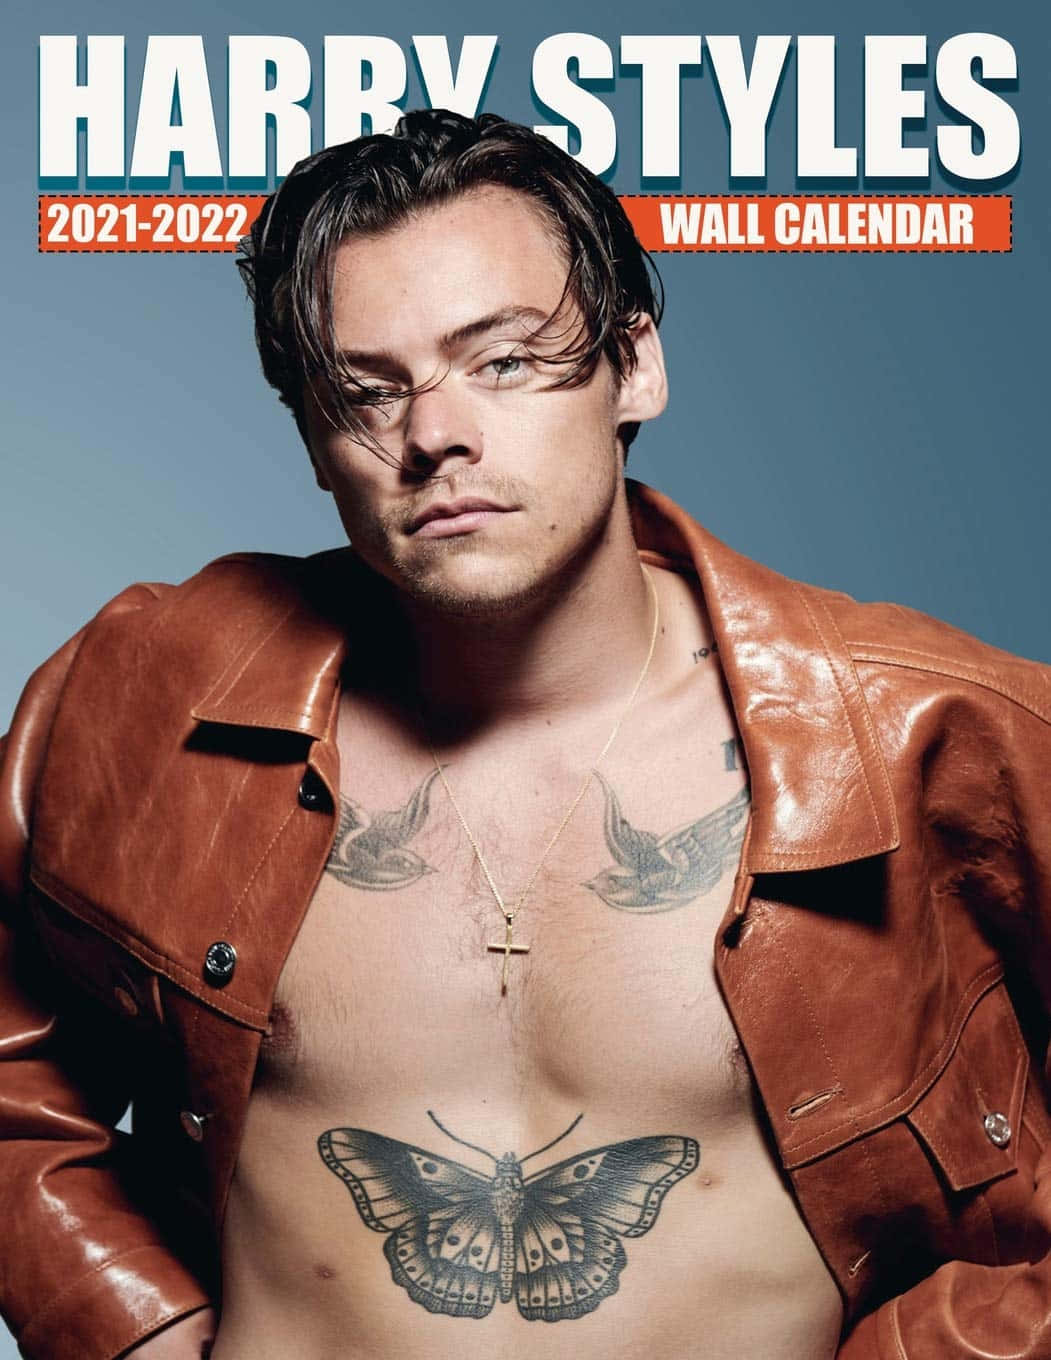 "Harry Styles shines in 2021"